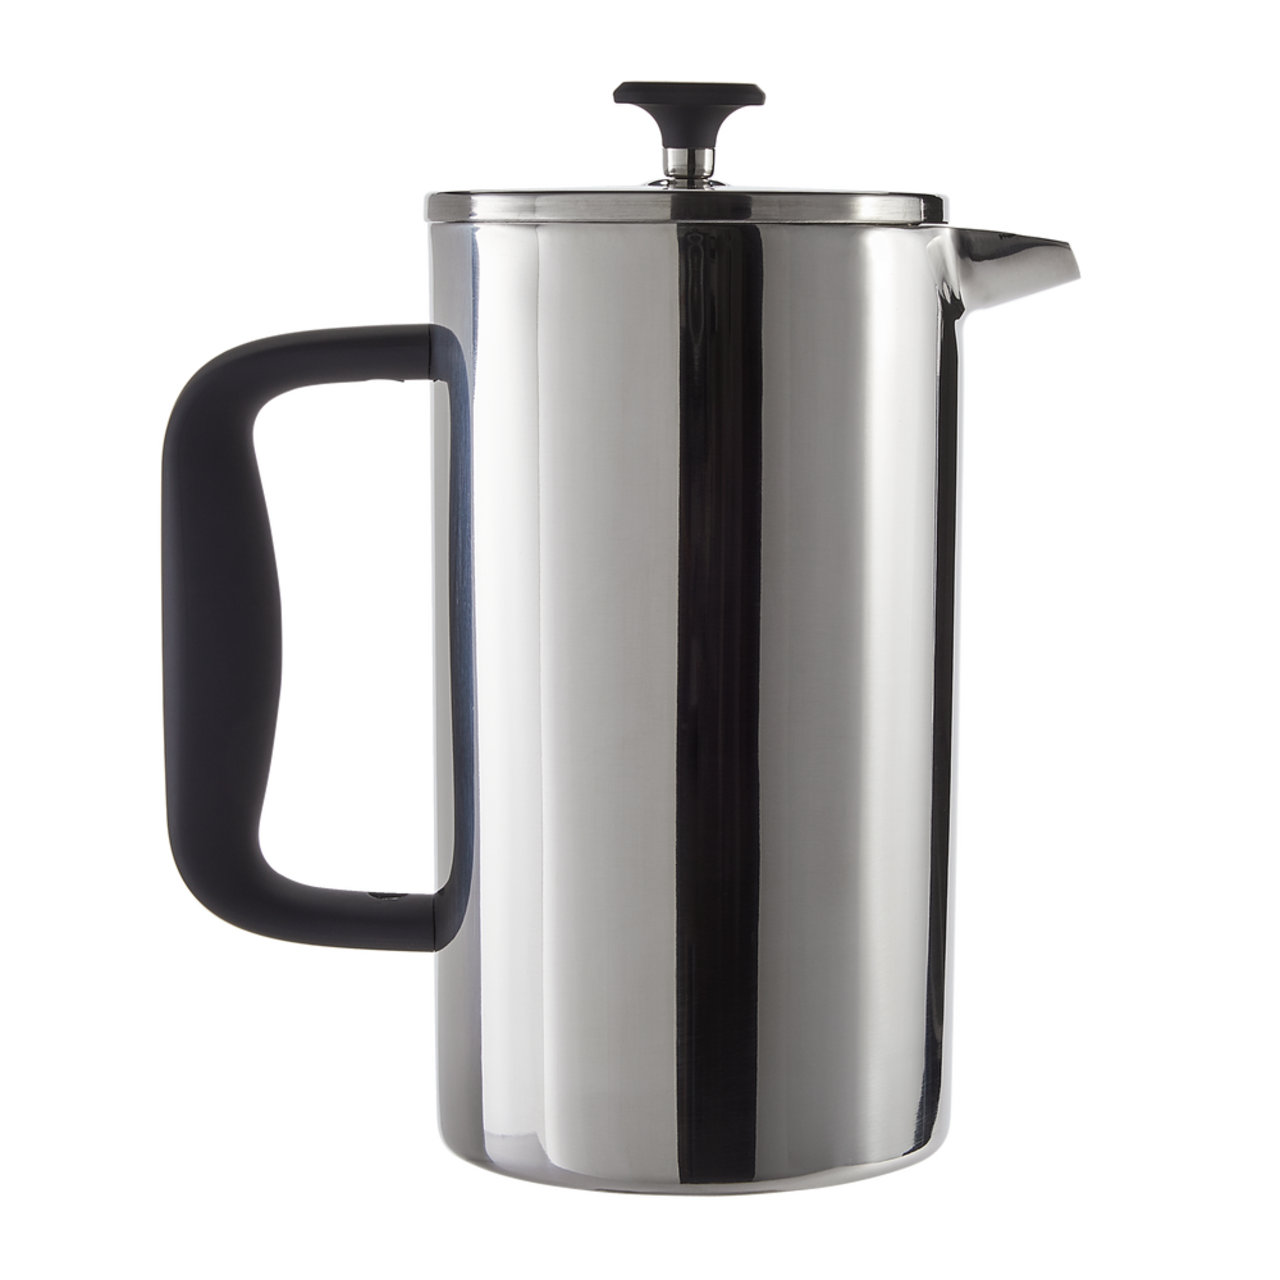  Outlery French Press - Portable Stainless Steel Coffee